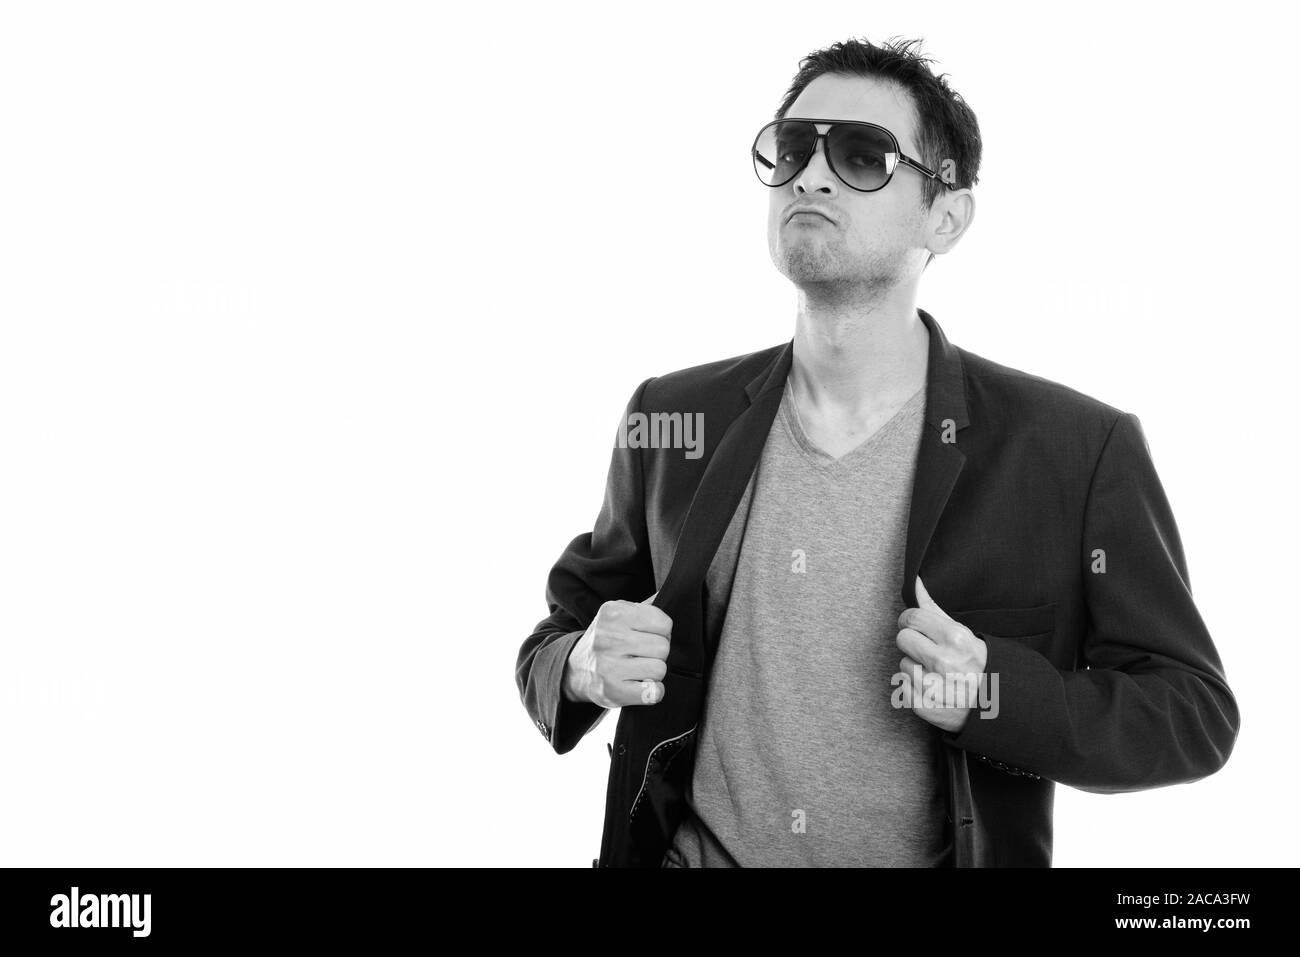 Studio shot of cool young man wearing sunglasses while fixing his jacket Stock Photo